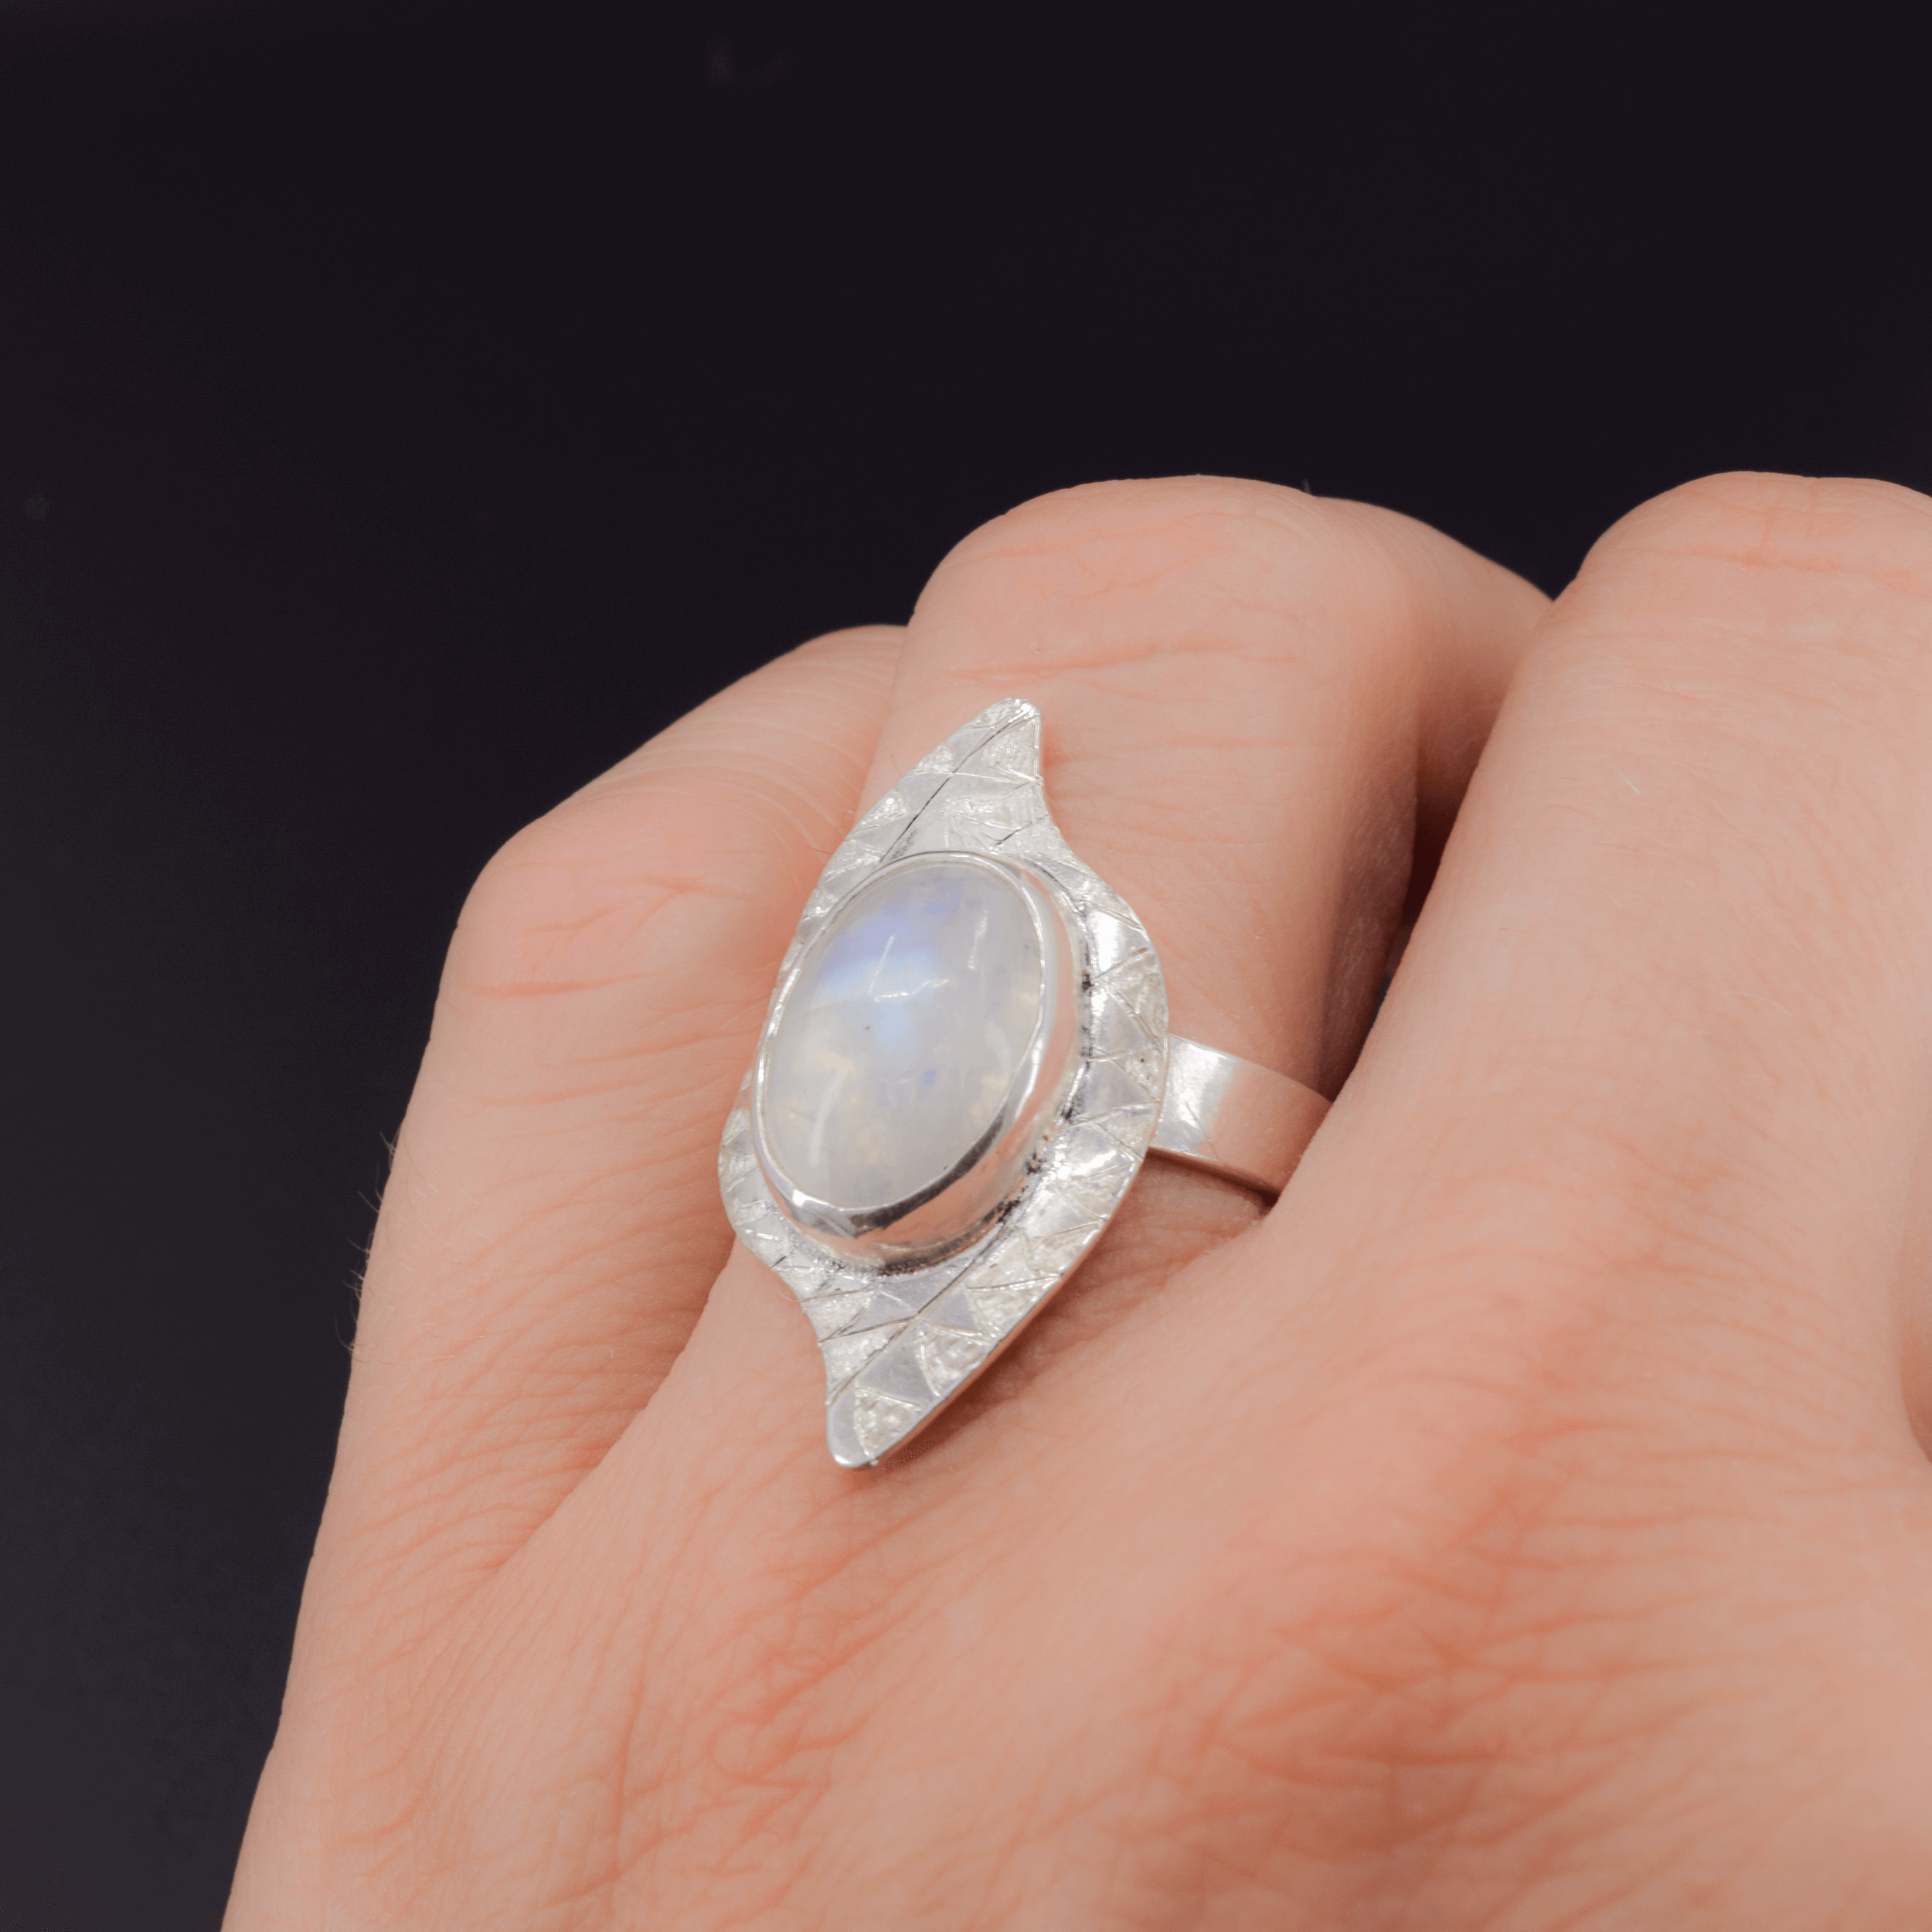 Oval rainbow moonstone sterling silver ring with a tribal style hand textured border worn on finger